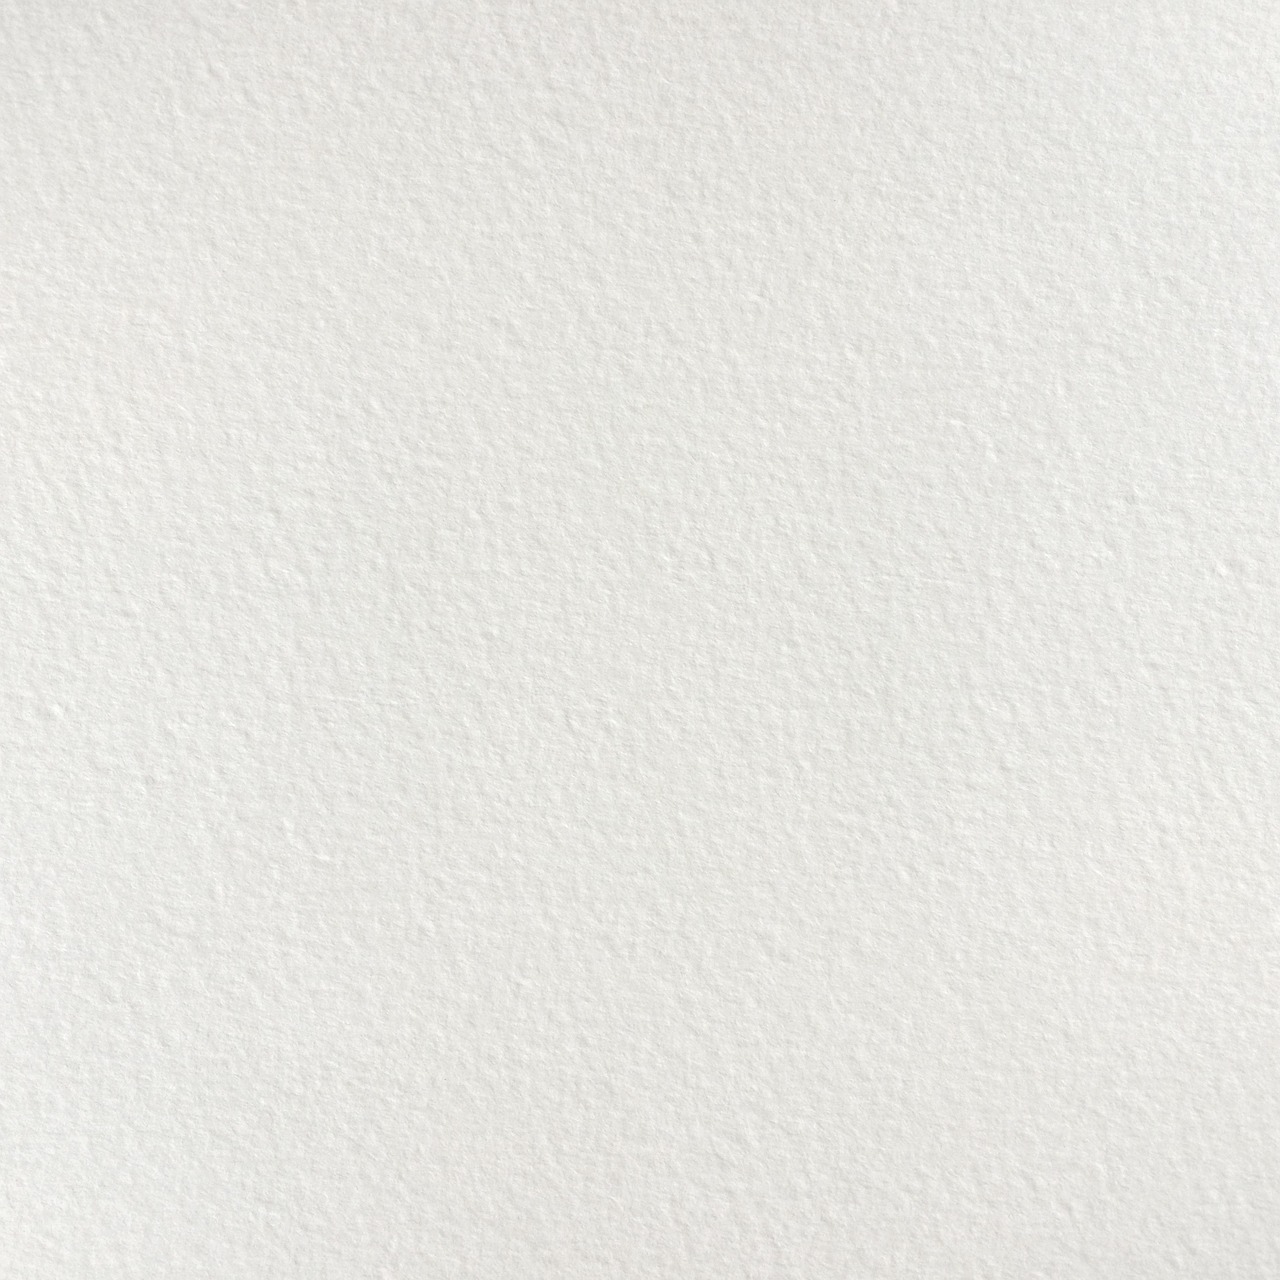 a man riding a snowboard down a snow covered slope, an ultrafine detailed painting, unsplash, visual art, background is white and blank, paper texture 1 9 5 6, muted watercolor. minimalist, 64x64